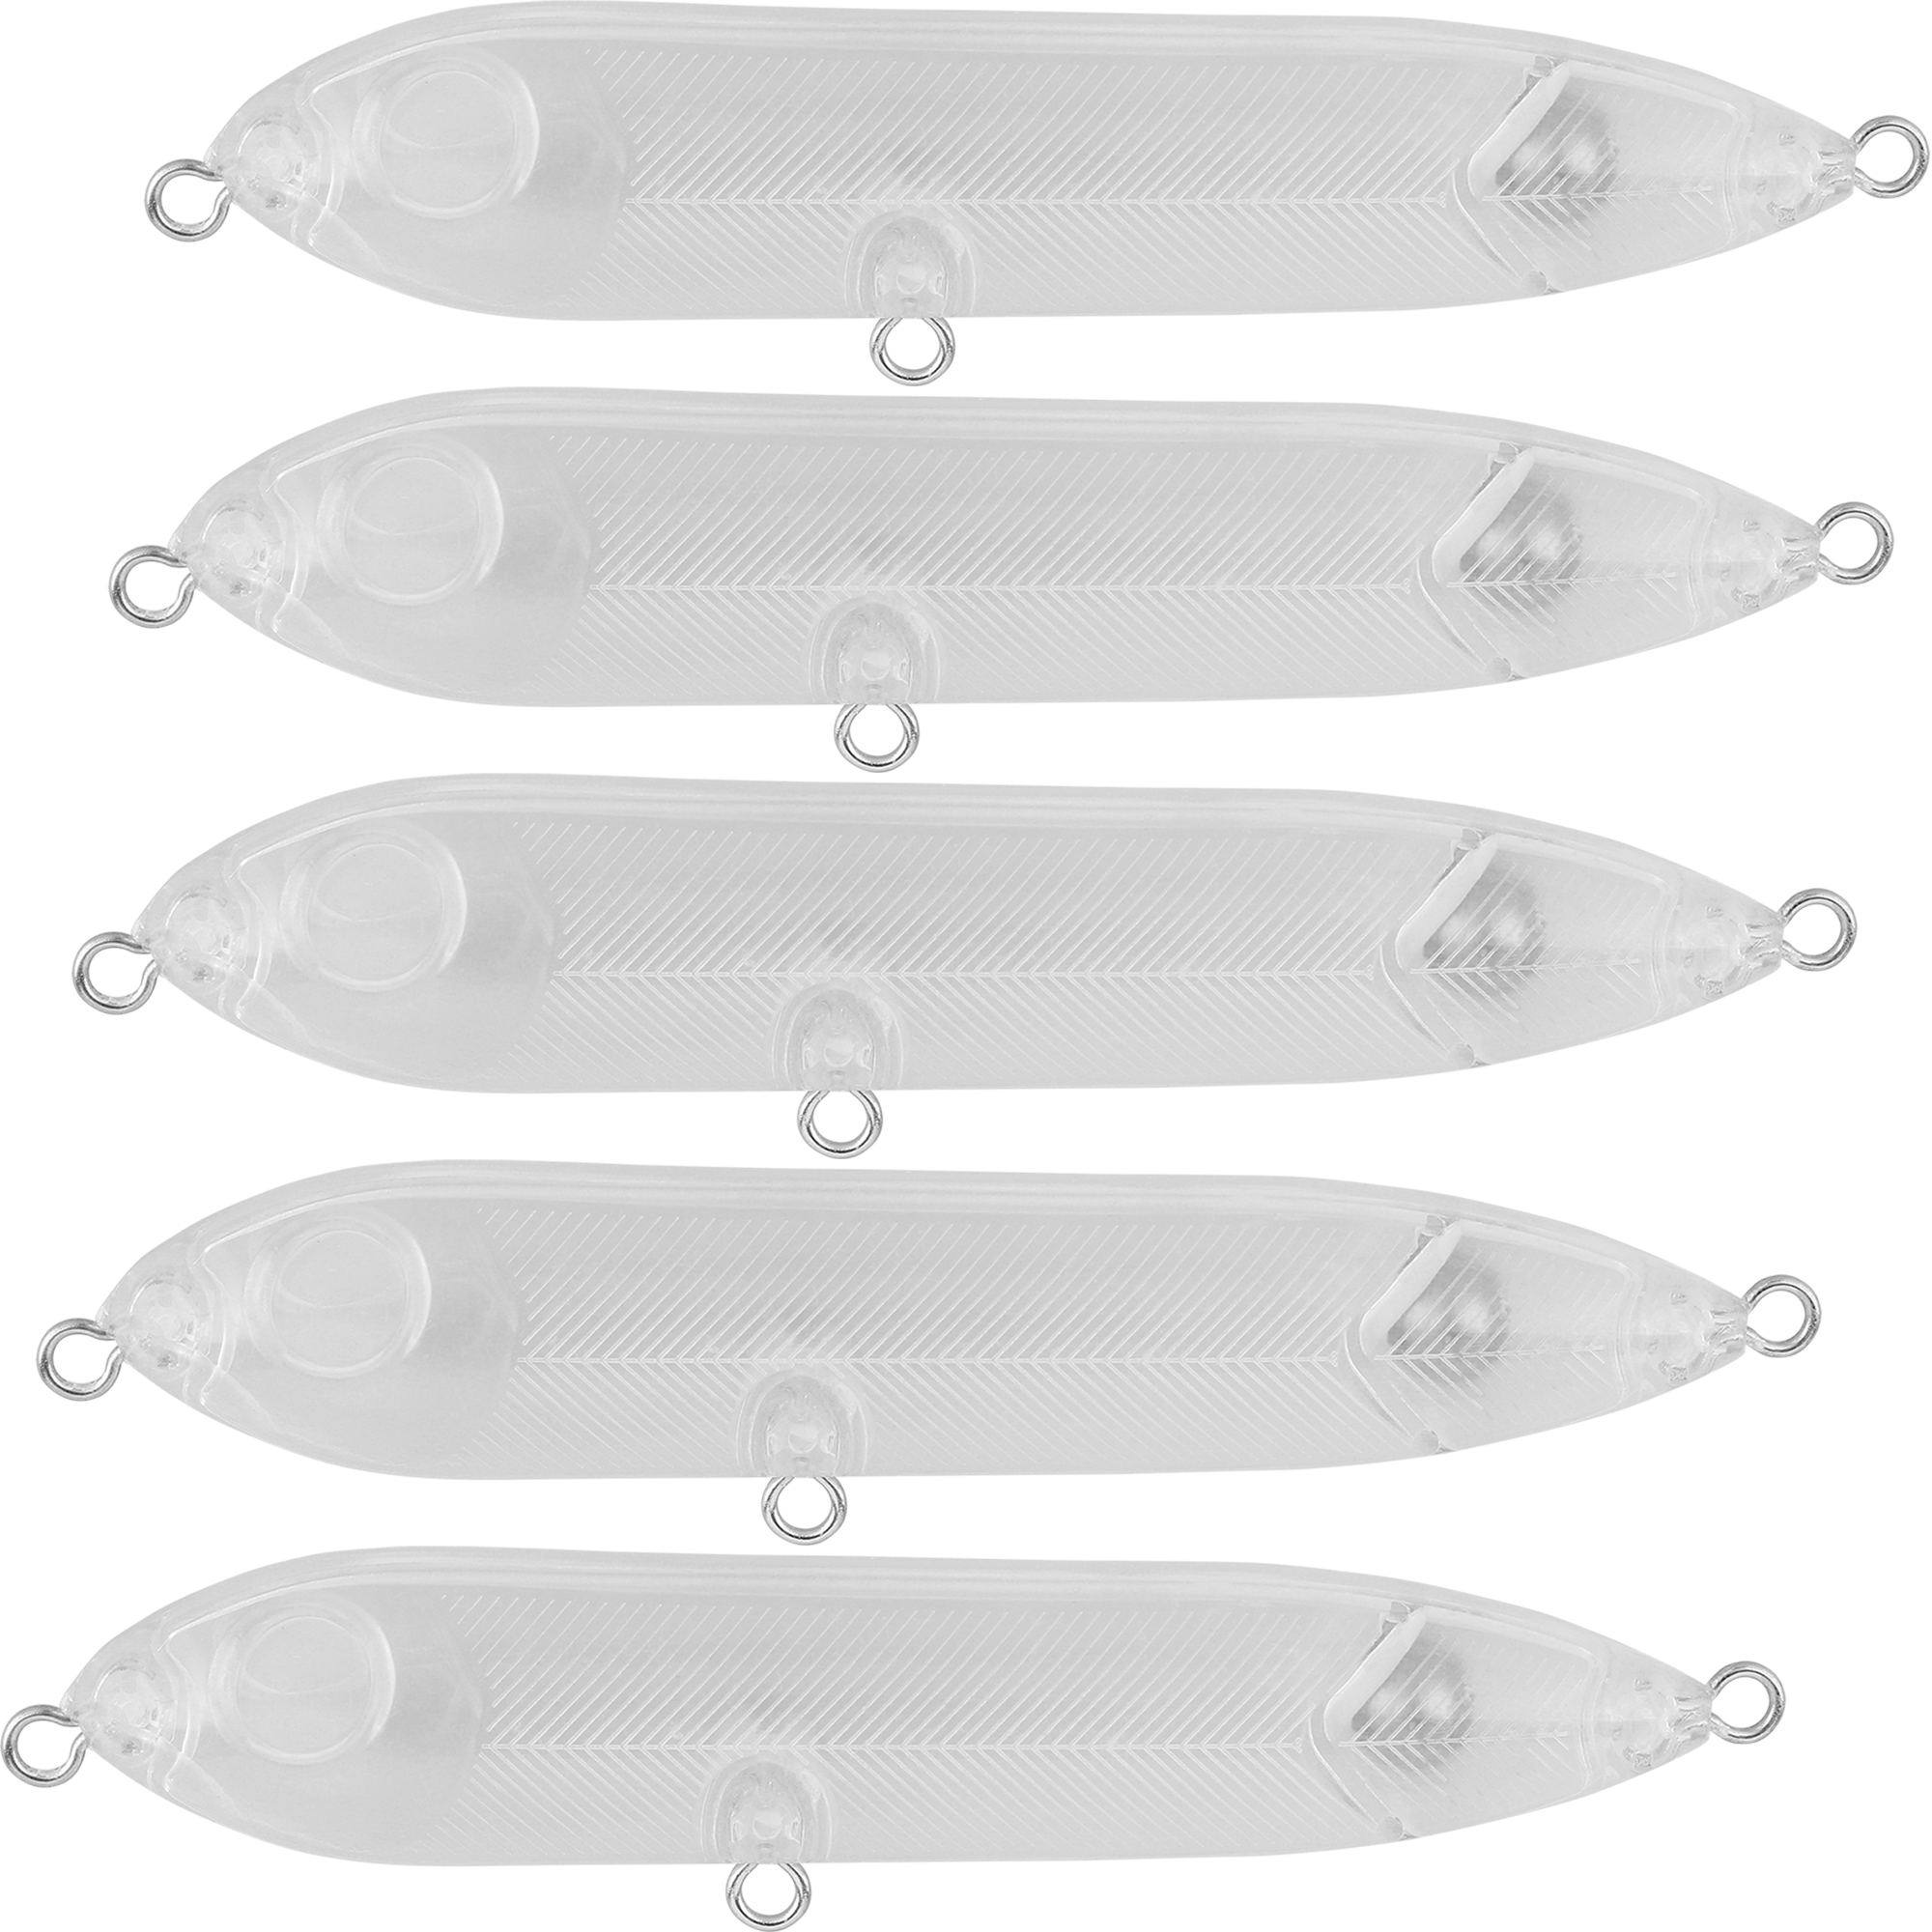 Catfish Rattling Line Float Lure for Catfishing, Demon Dragon Style Peg for Santee Rig Fishing, 4 inch (5-Pack, Clear Unpainted Blank)